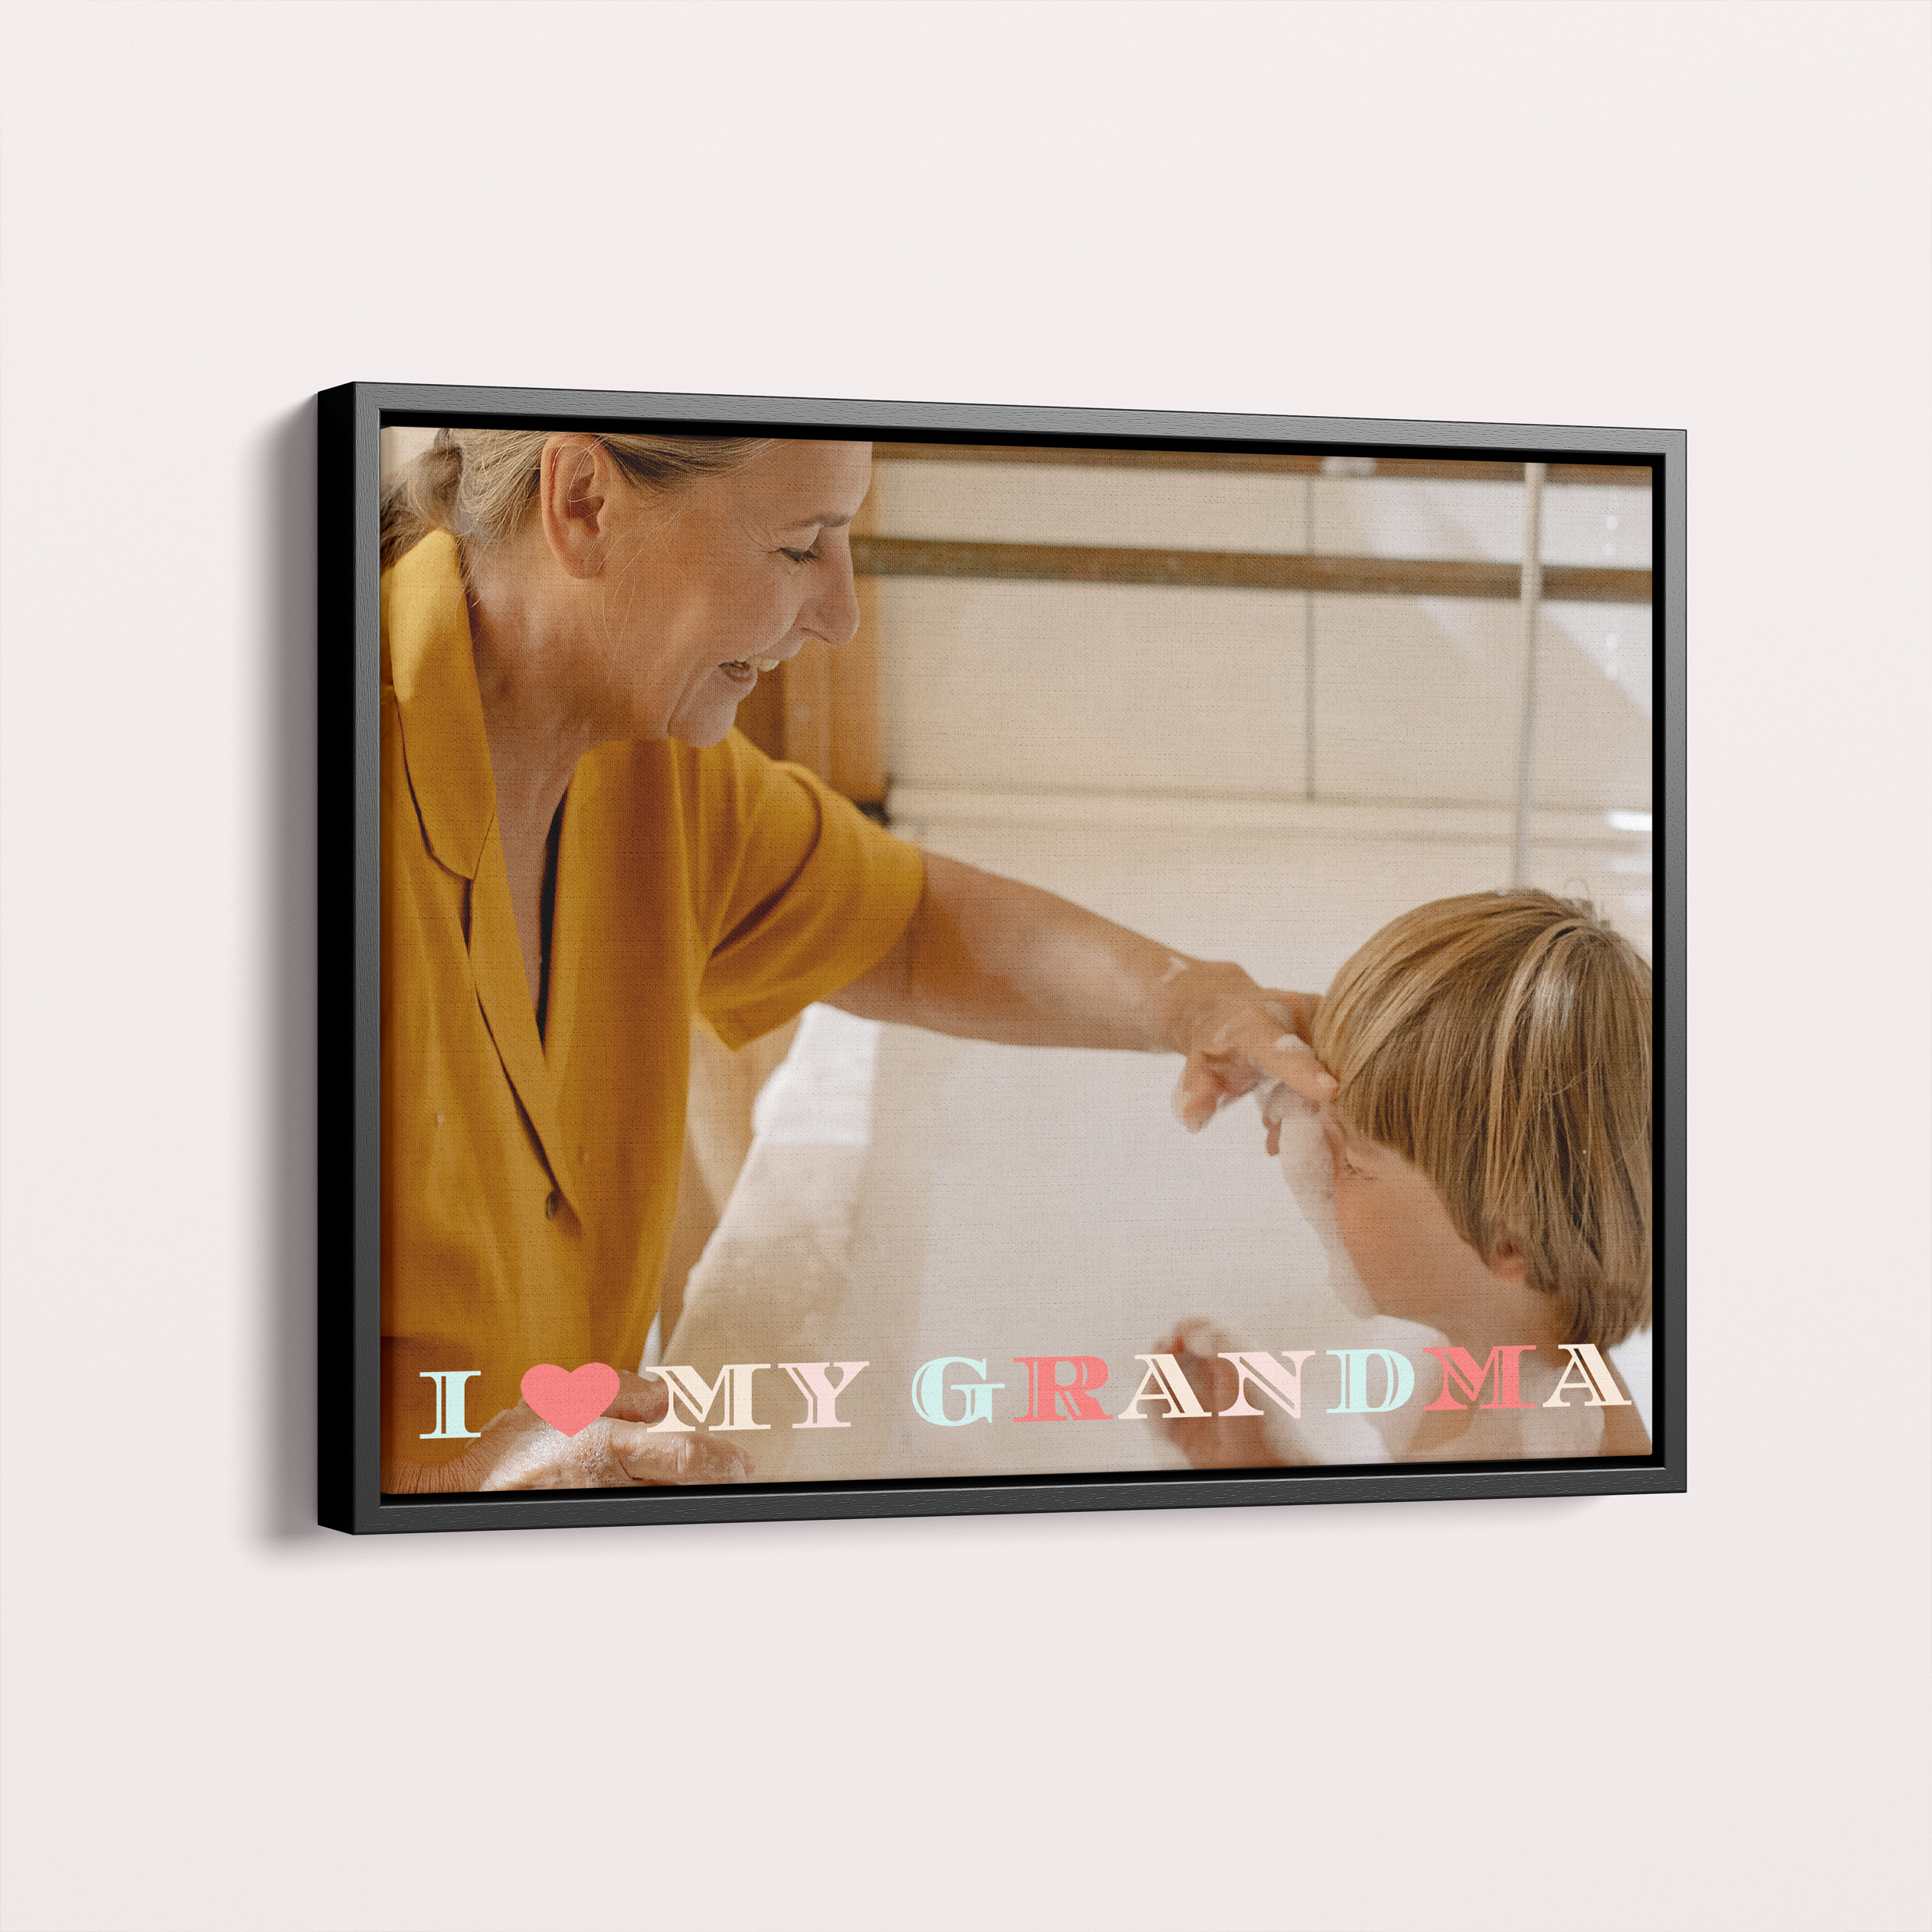  Personalized Granny's Love Framed Photo Canvas - Display your cherished memories with our unique design, crafted in a landscape orientation for the perfect showcase of your favorite photo.